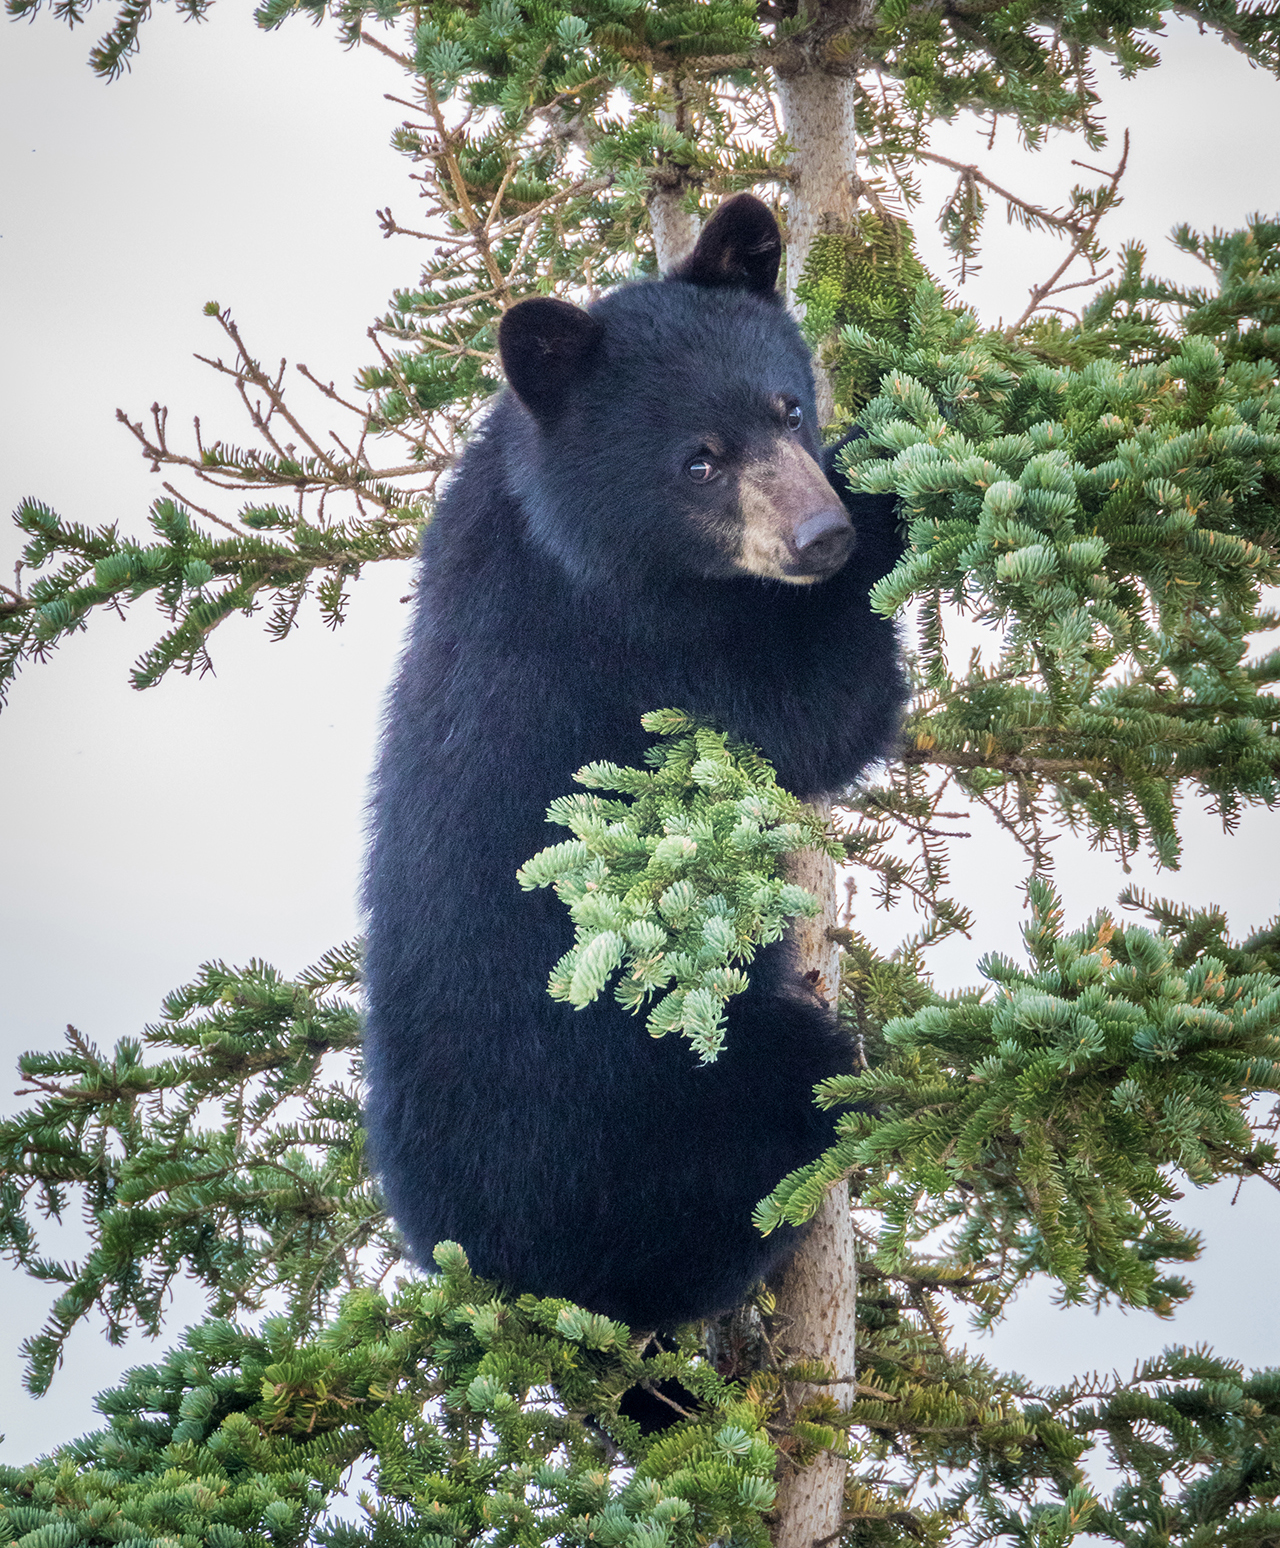 Black bear in a tree. Robyn Jacques photo.